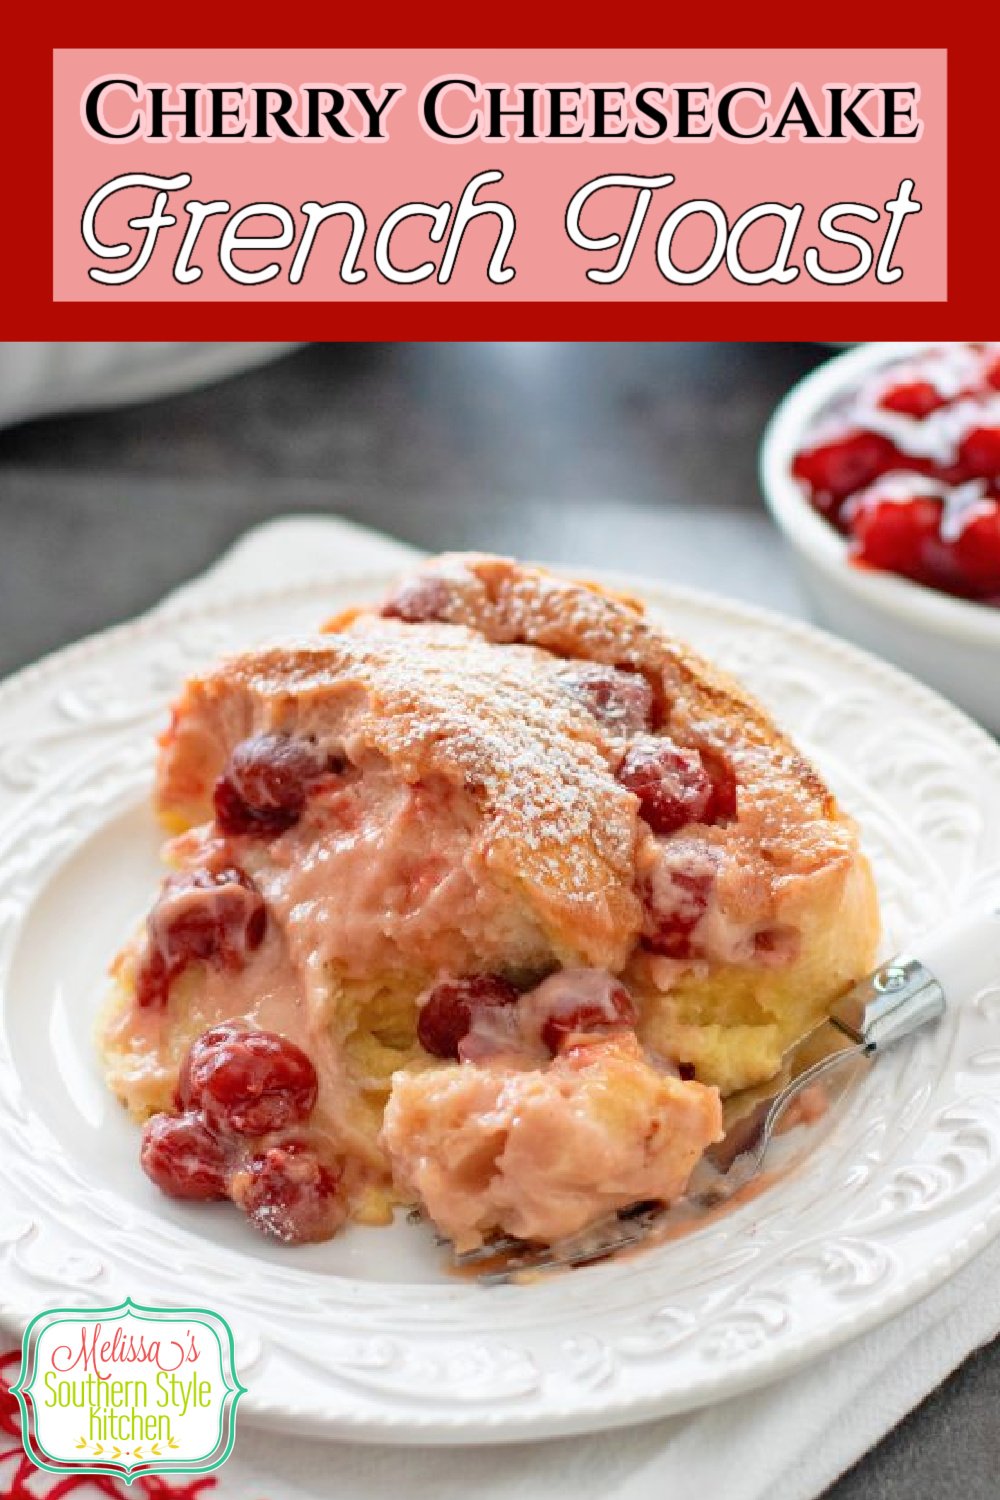 This delectable Cherry Cheesecake French Toast recipe is an indulgent fusion dish combining french toast with a cherry cheesecake filling #frenchtoast #cherrycheesecake #frenchtoastrecipes #stuffedfrenchtoast #mothersdaybrunch #brunchrecipes #cheesecake #cherrydesserts